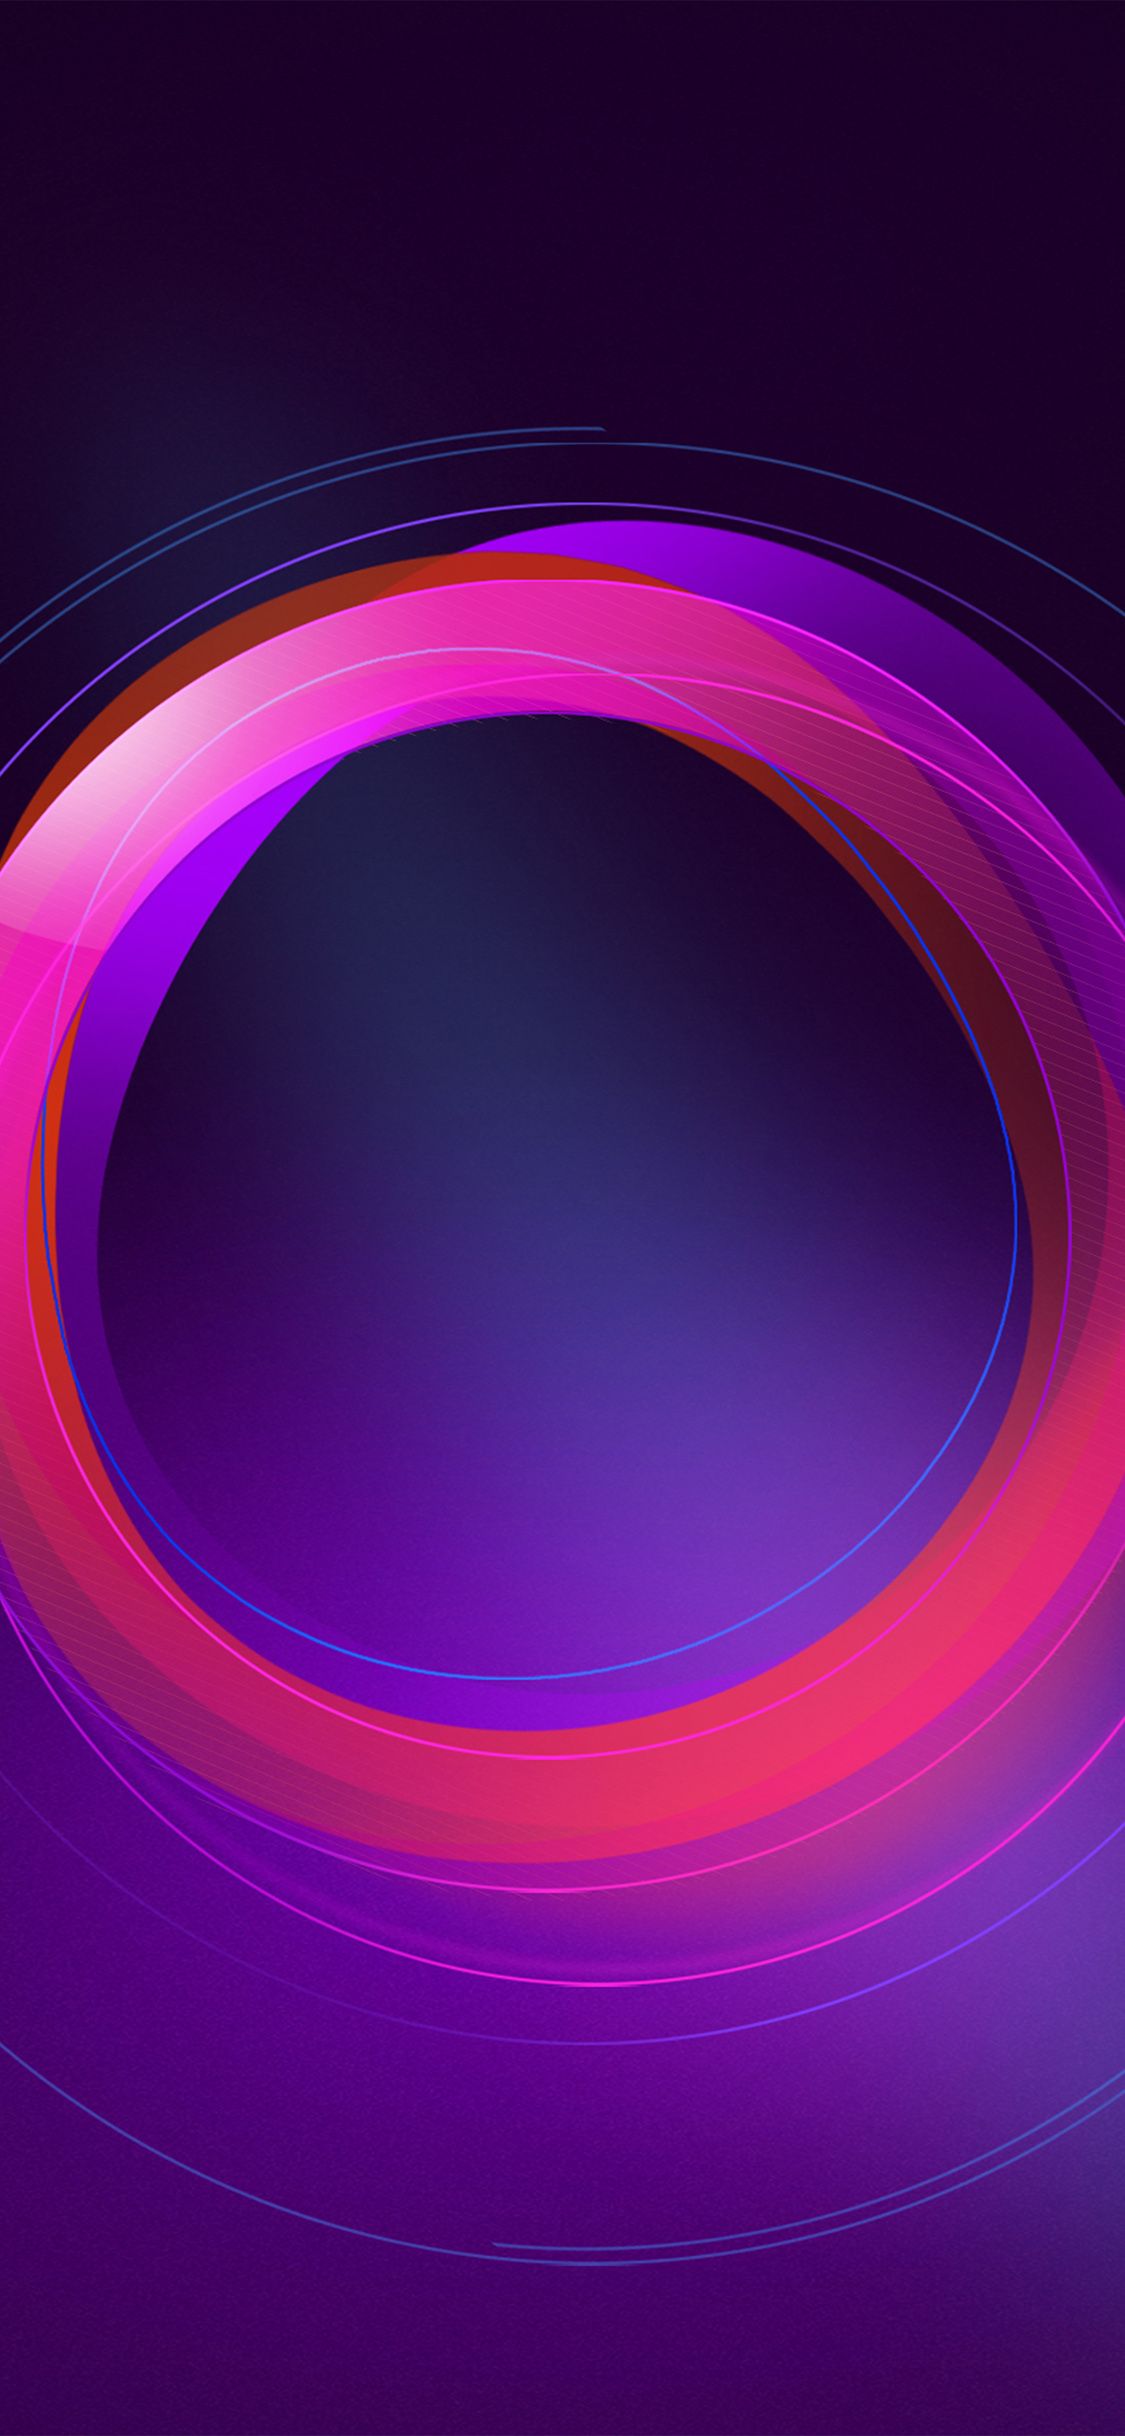 iPhone X wallpaper. circle abstract purple pattern background